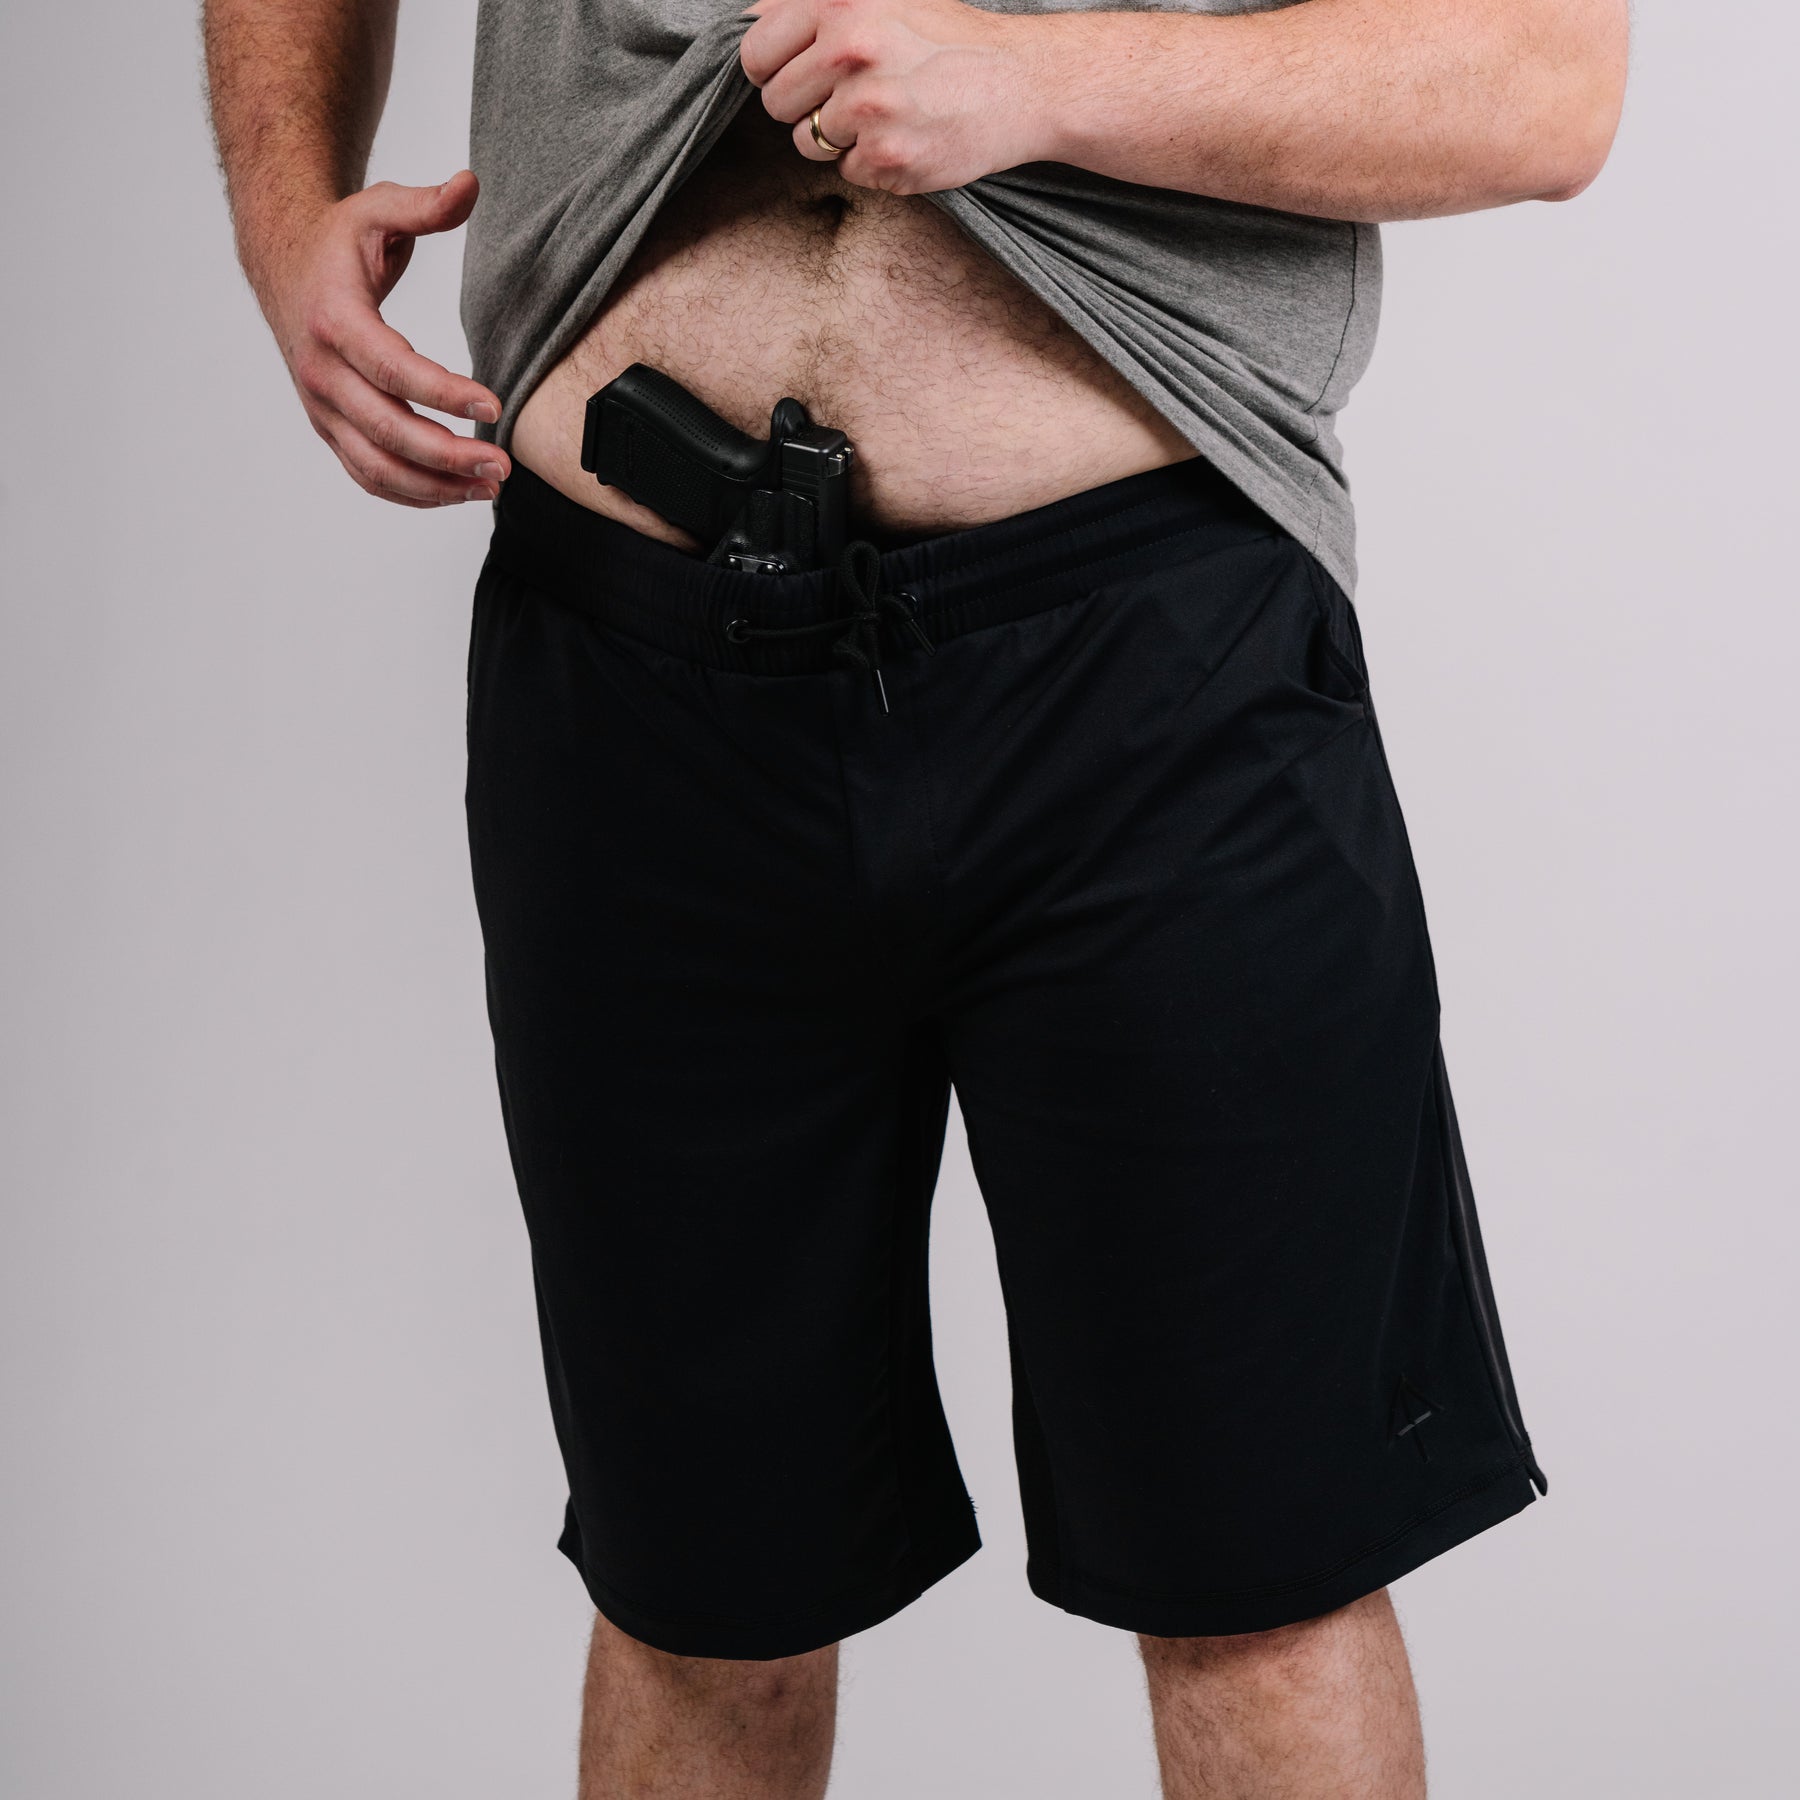 Men's Concealed Carry Gym Shorts – Arrowhead Tactical Apparel